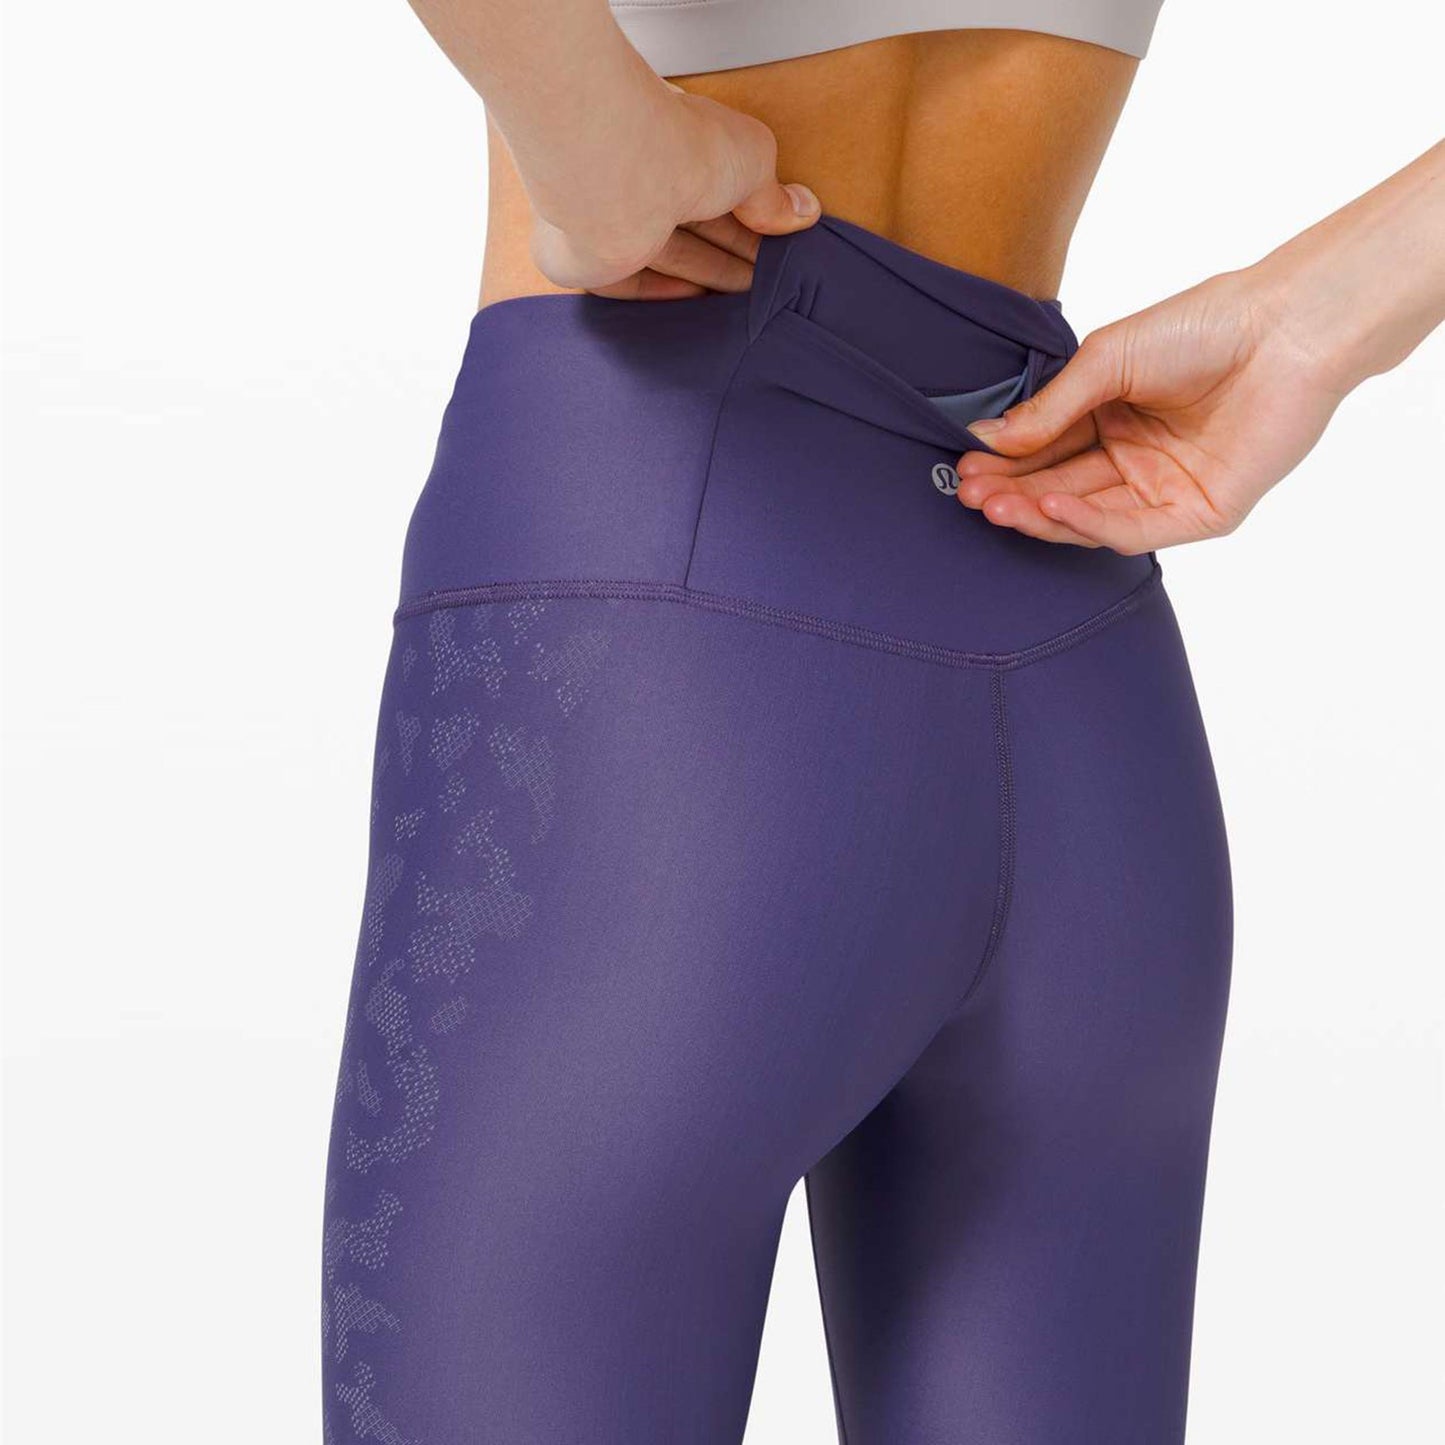 2020 lululemon mapped out high rise 28" tights - size 4